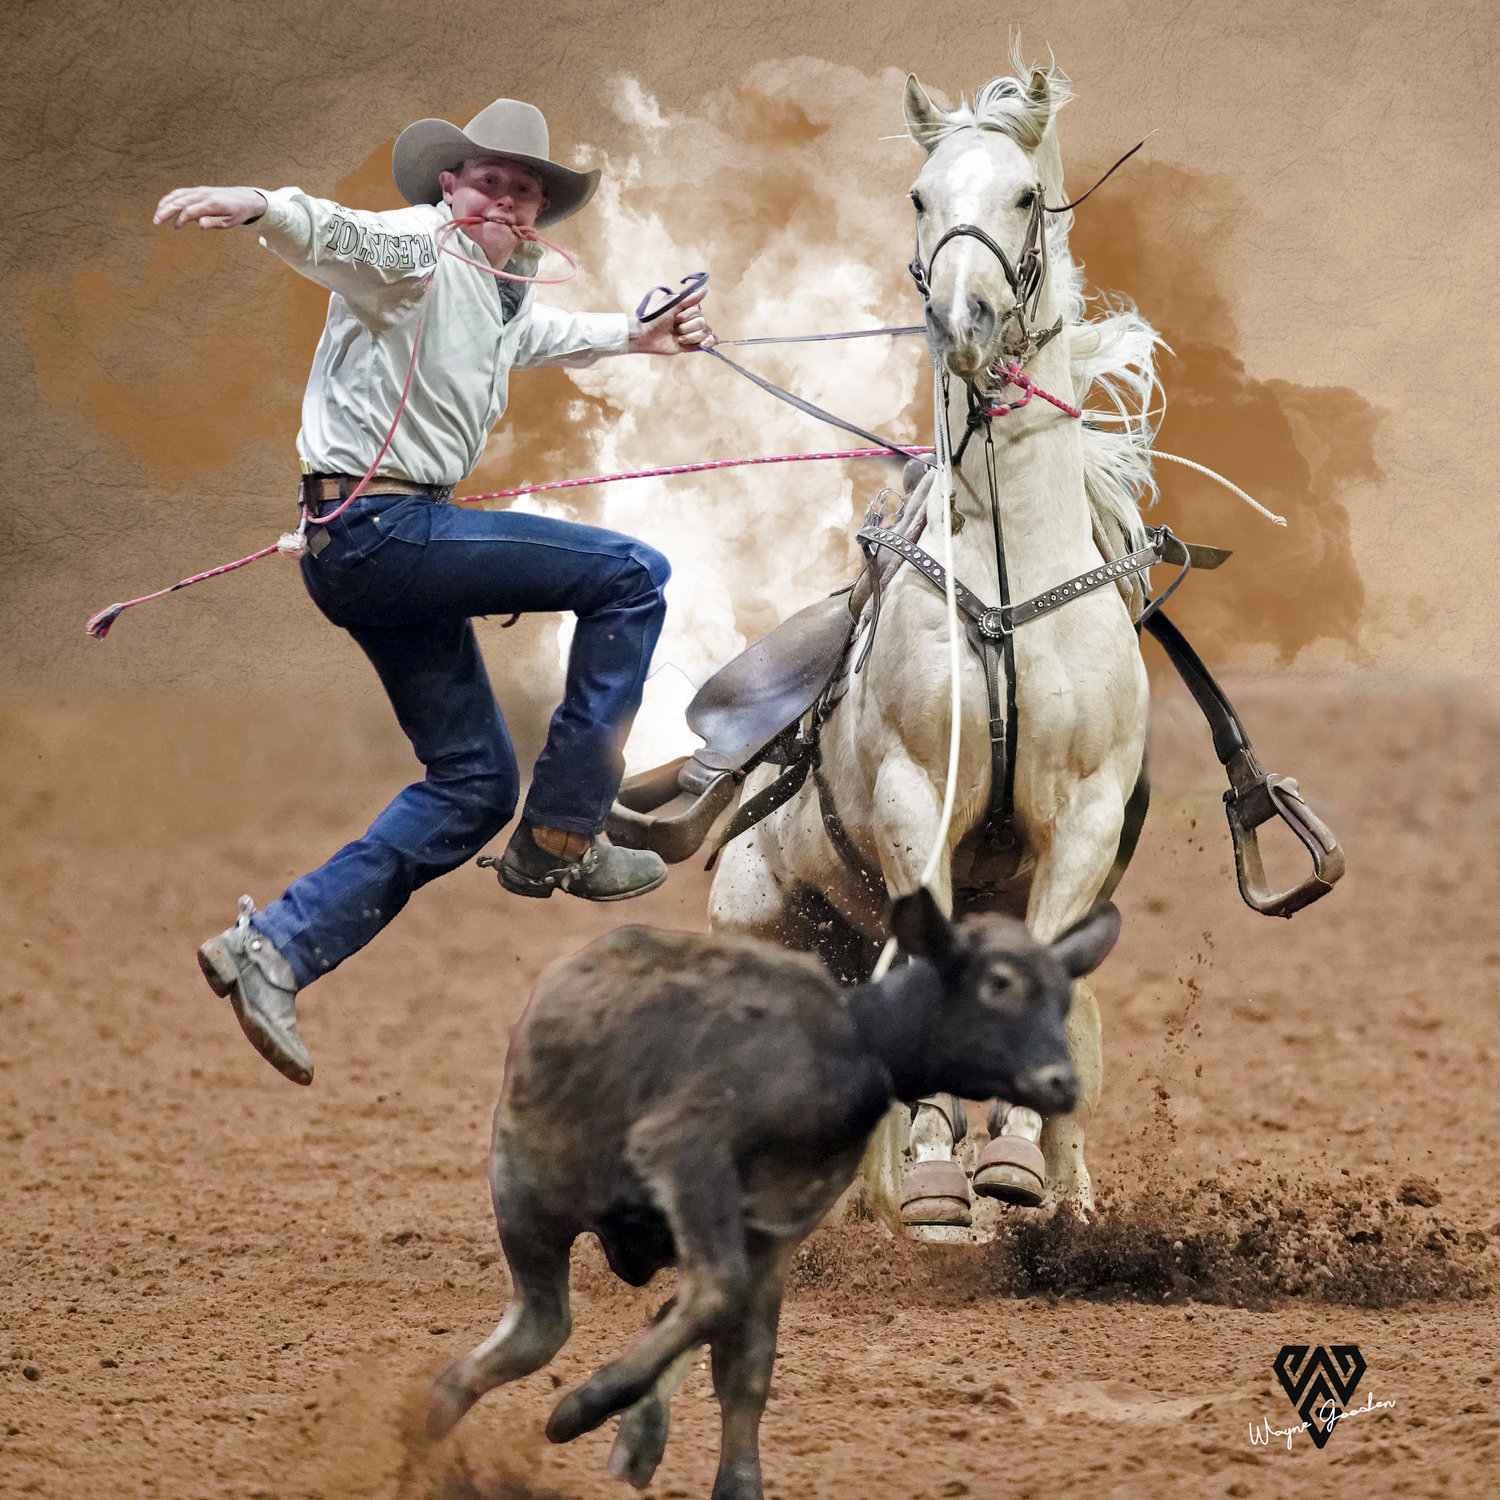 Quitman’s Colt Carpenter is shown in action in competition at a rodeo earlier this year.